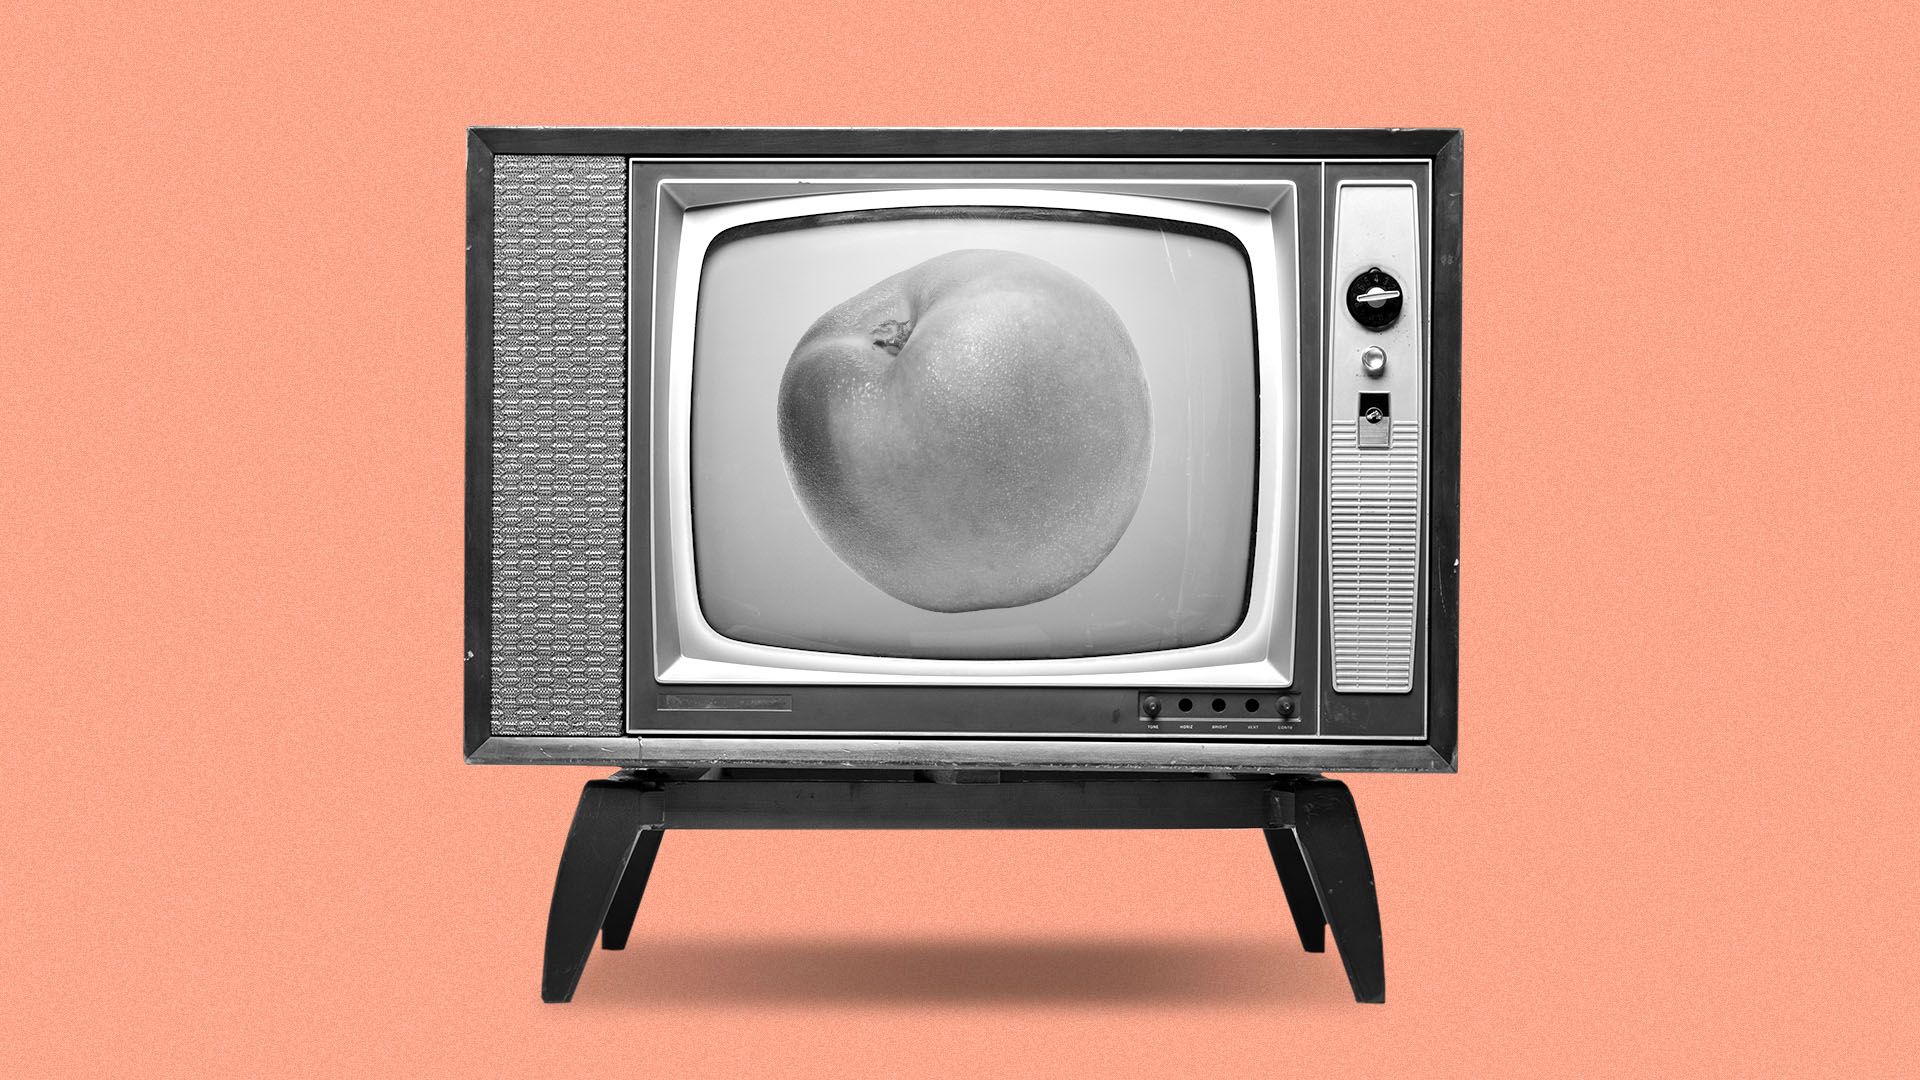 Illustration of an old black and white television set with a peach on the screen